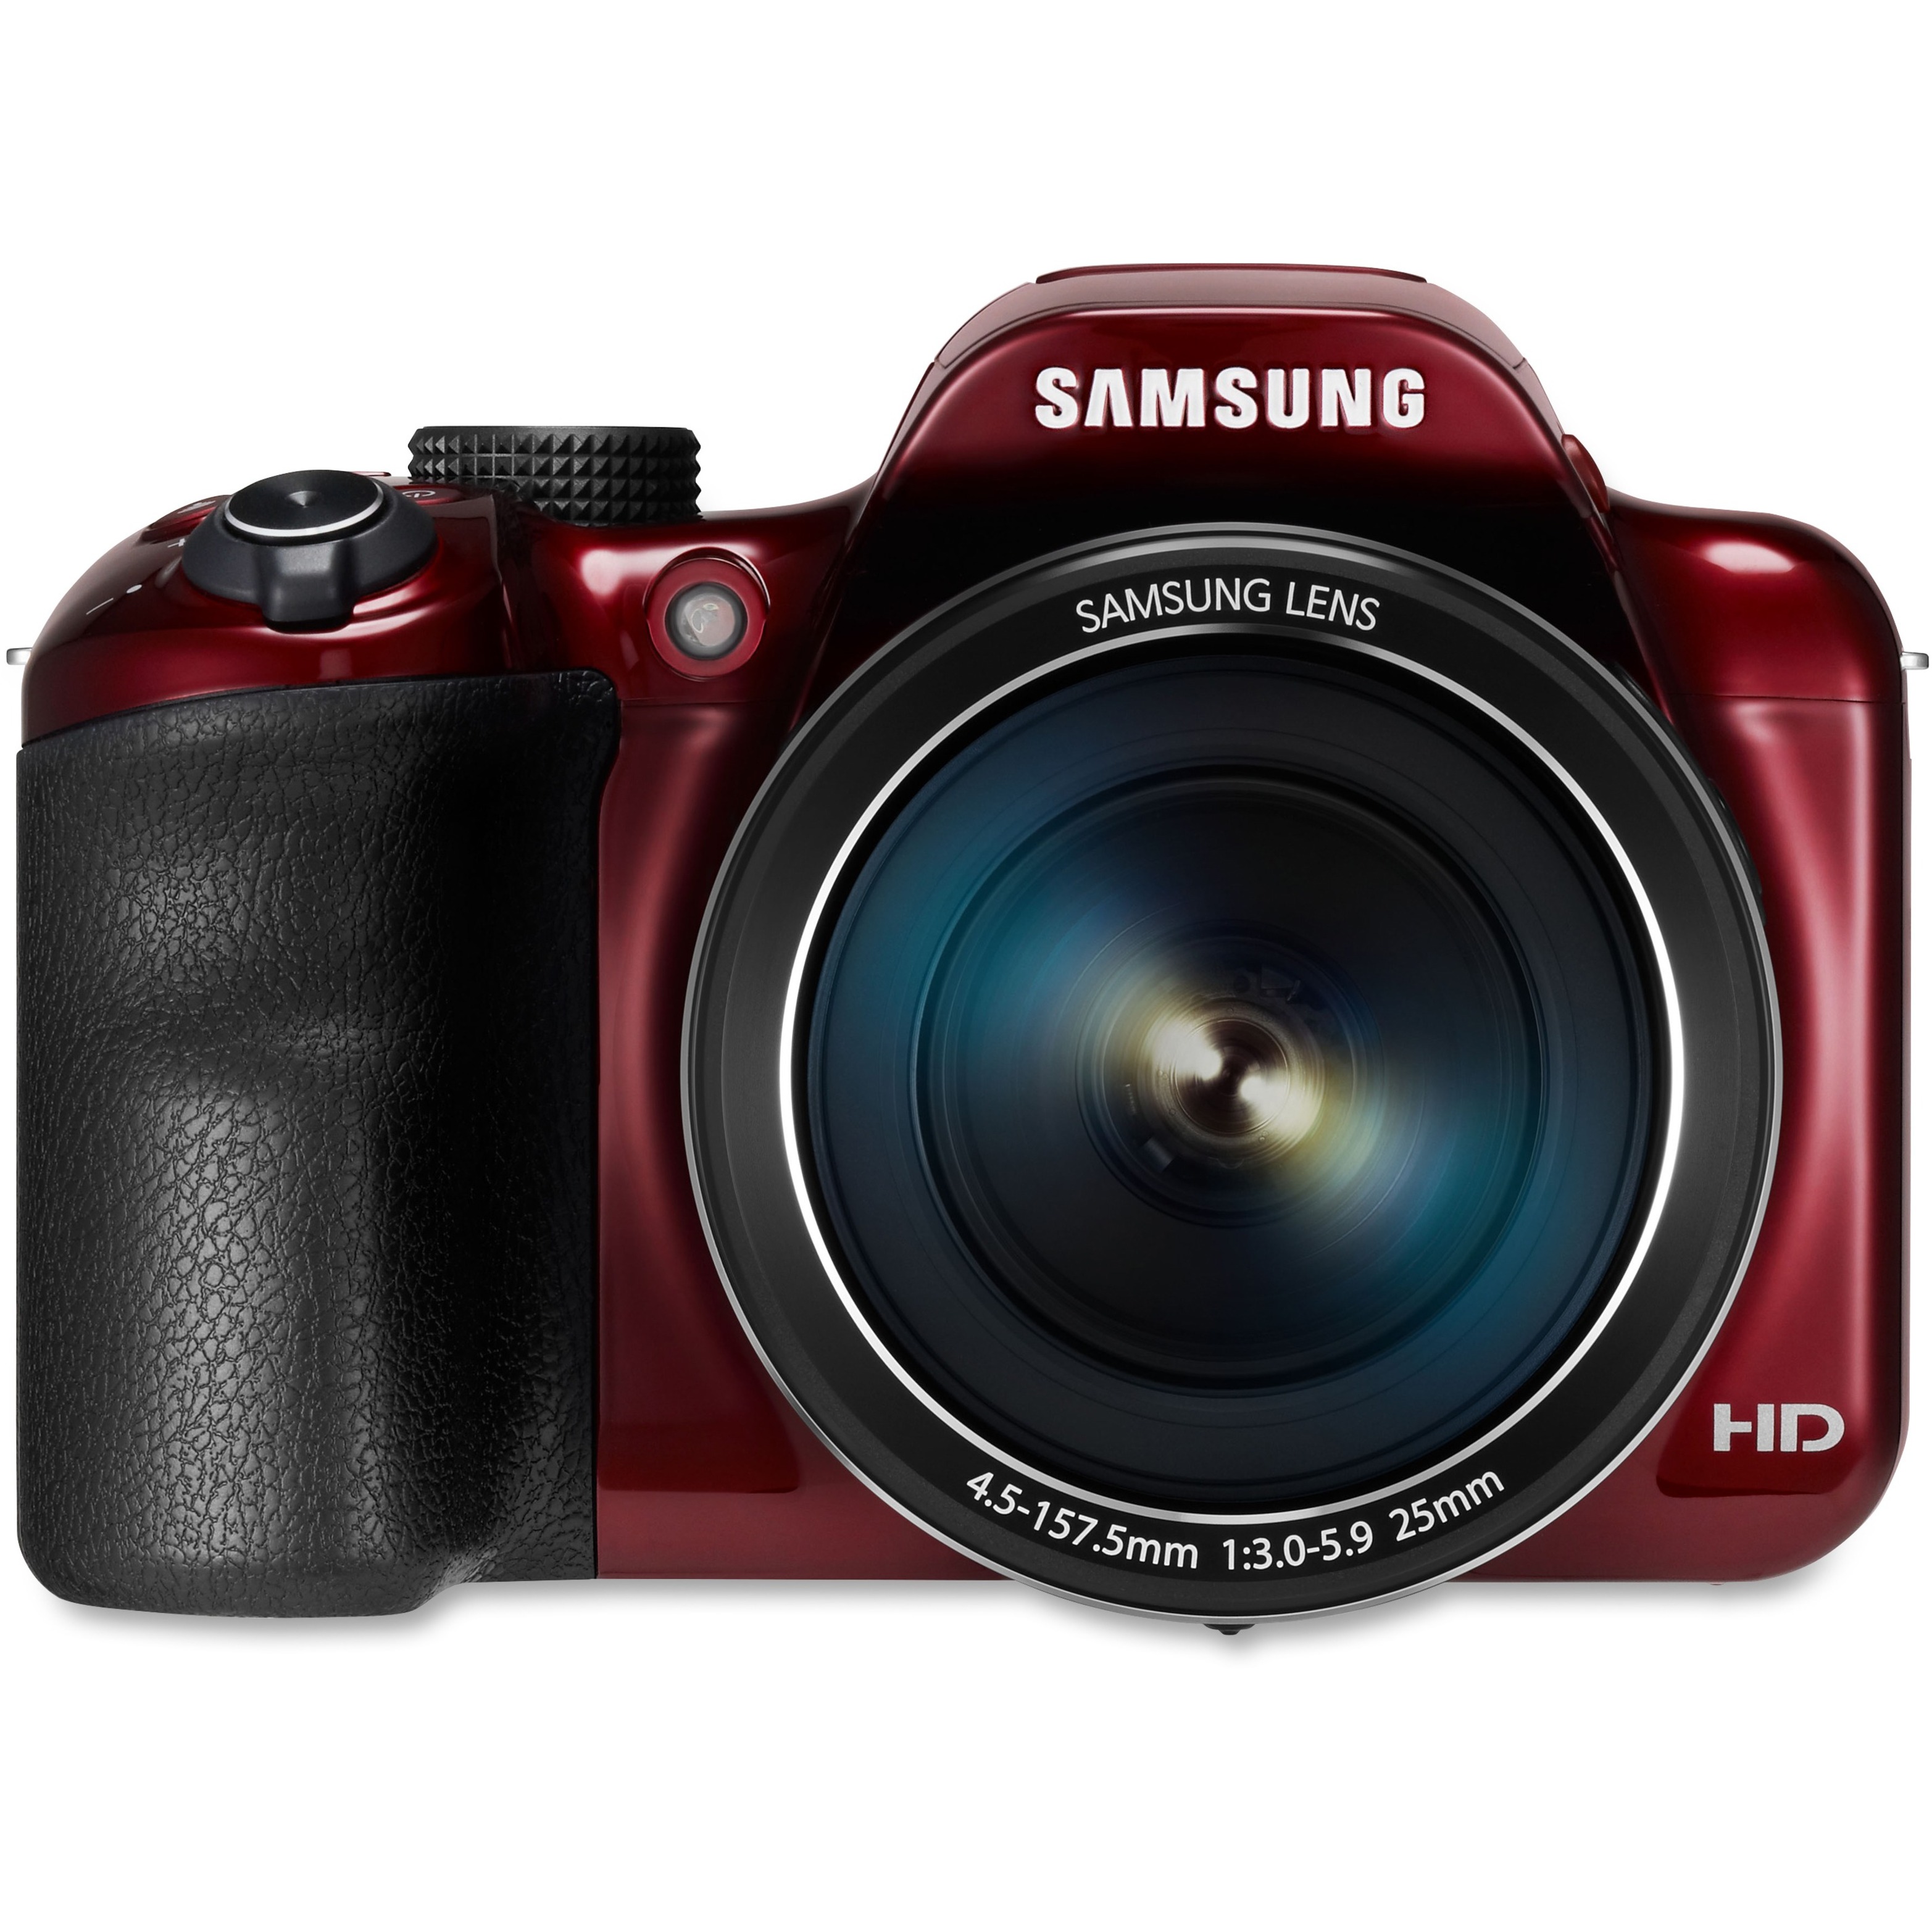 Samsung WB1100F 16.2 Megapixel Compact Camera, Red - image 1 of 5